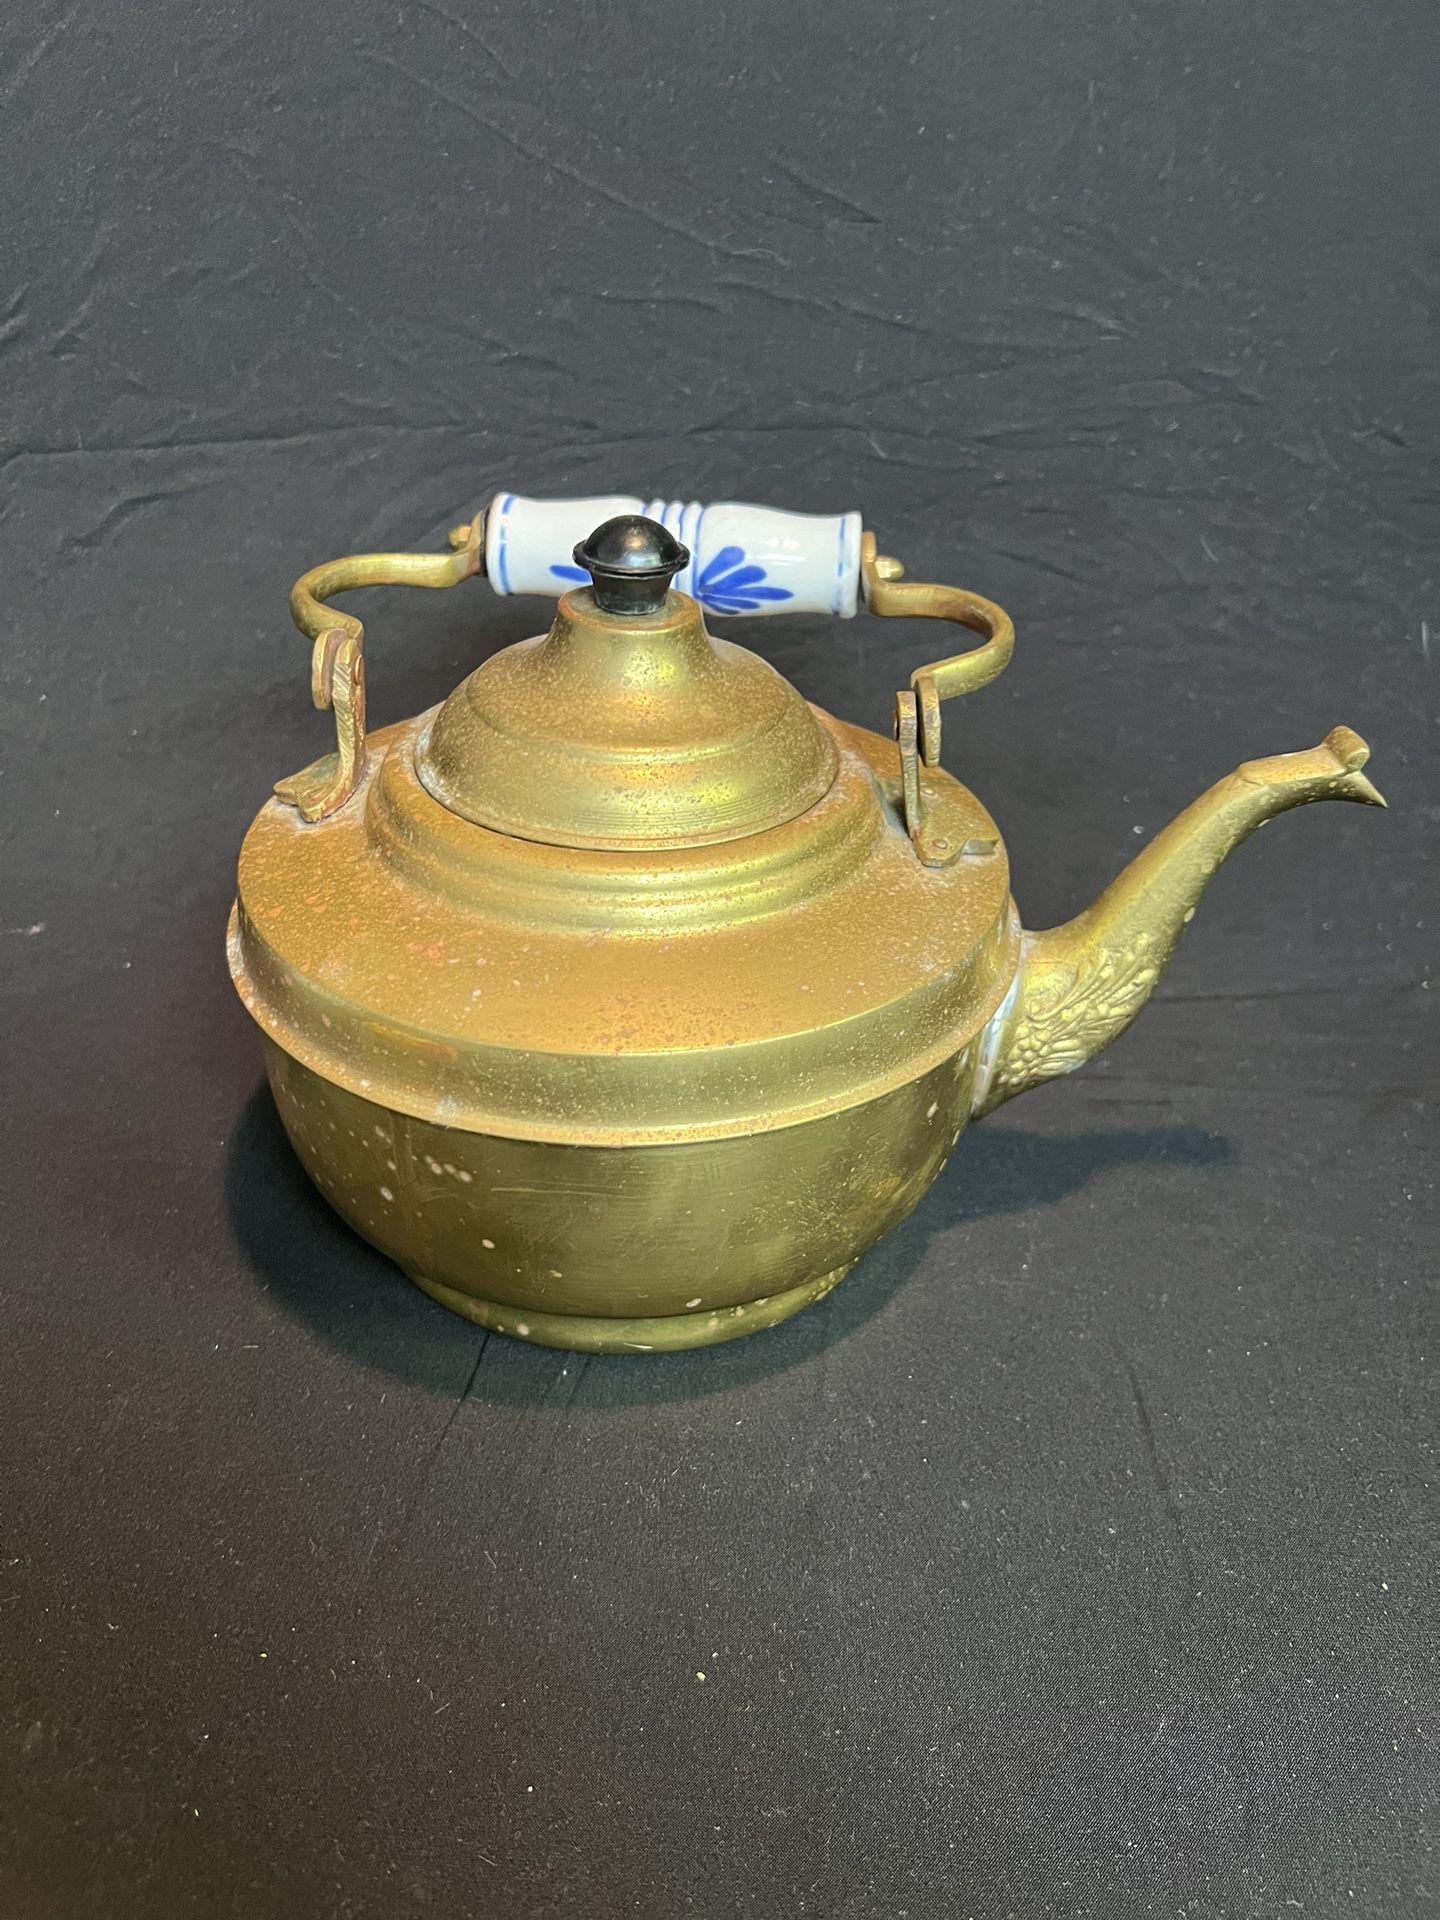 Copper tea kettle with blue and white porcelain handles